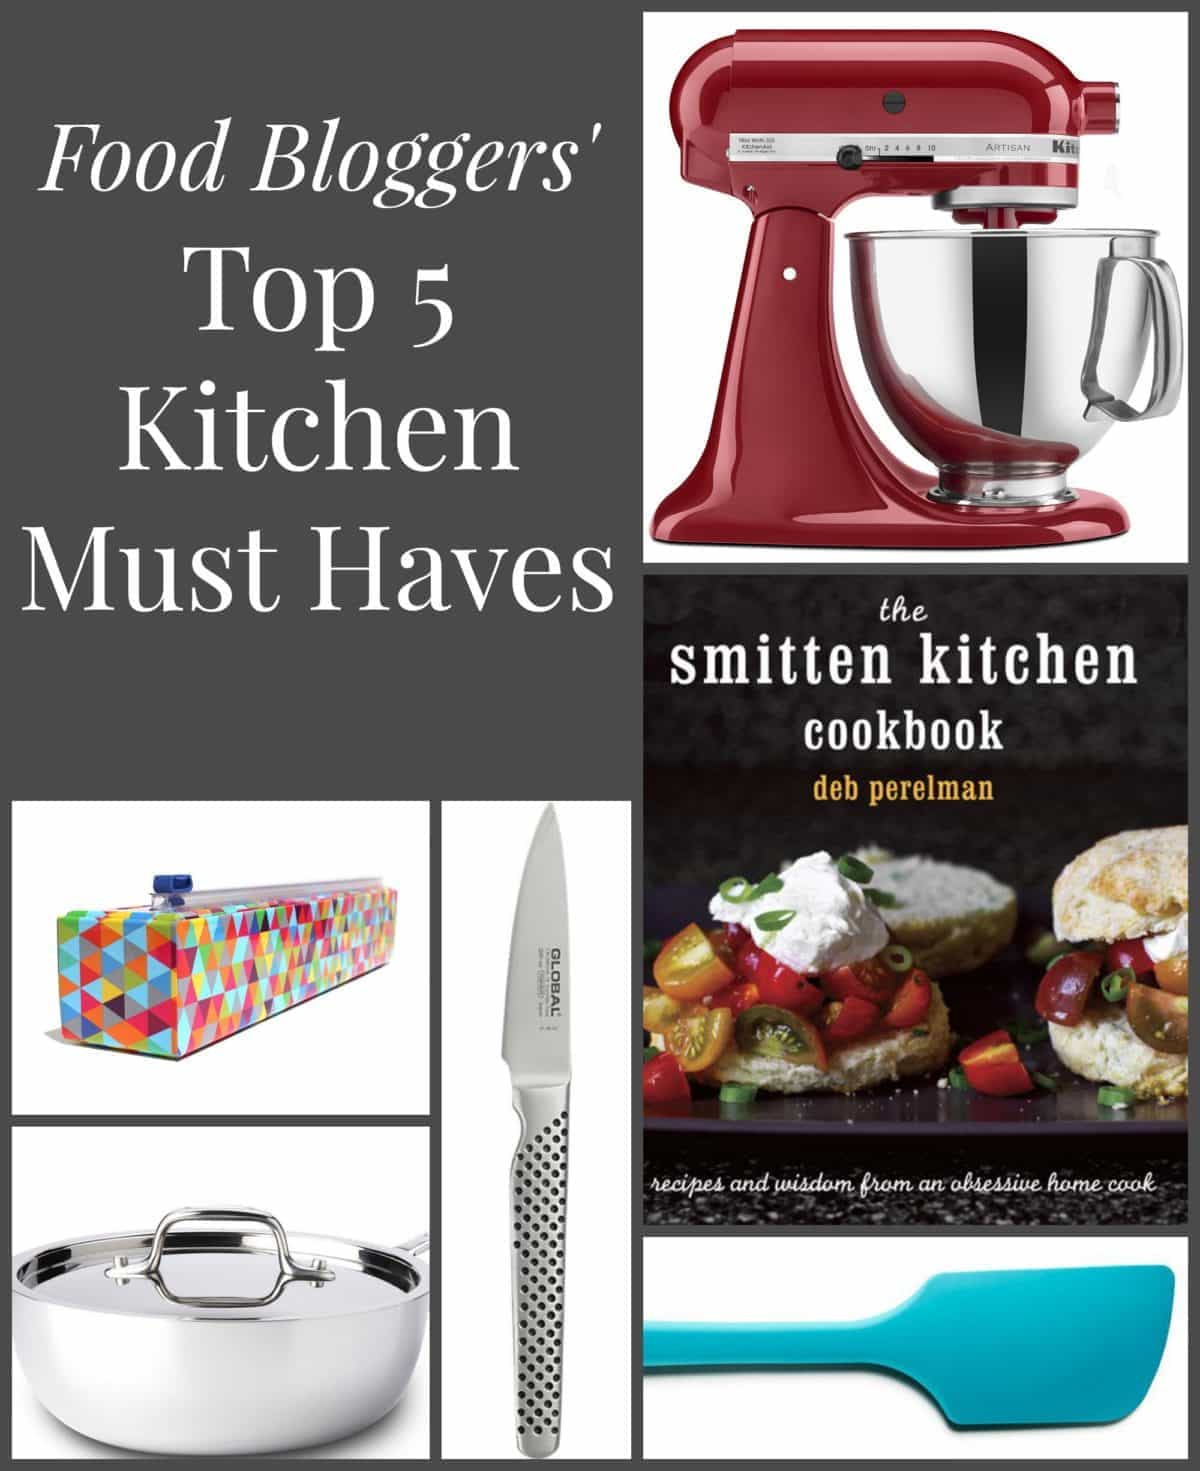 Kitchen Essentials - The Small Things Blog